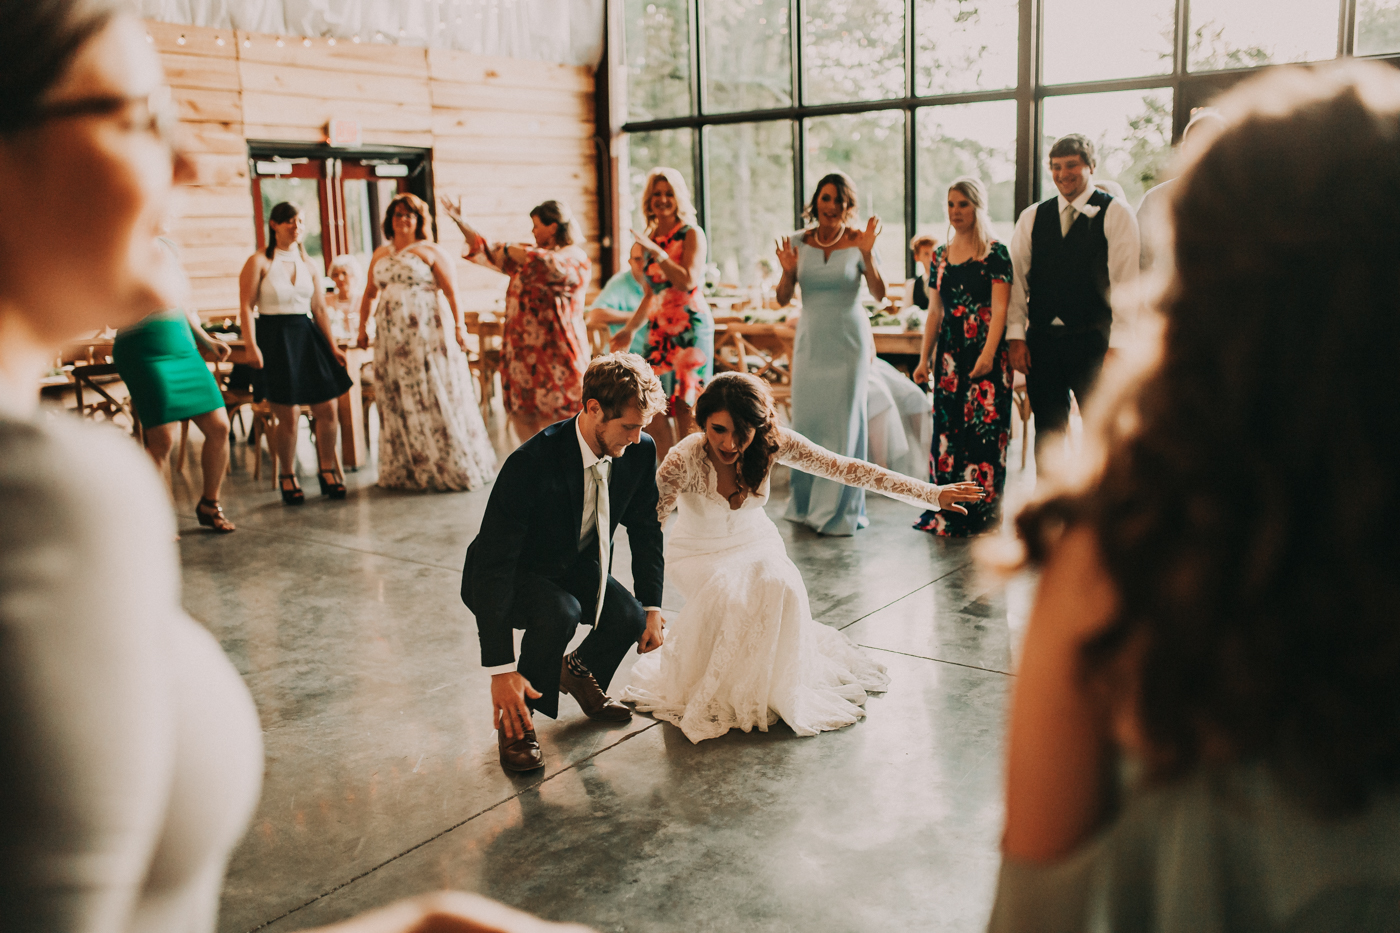 Burdoc Farms wedding by Billie-Shaye Style Photography featured on Nashville Bride Guide!